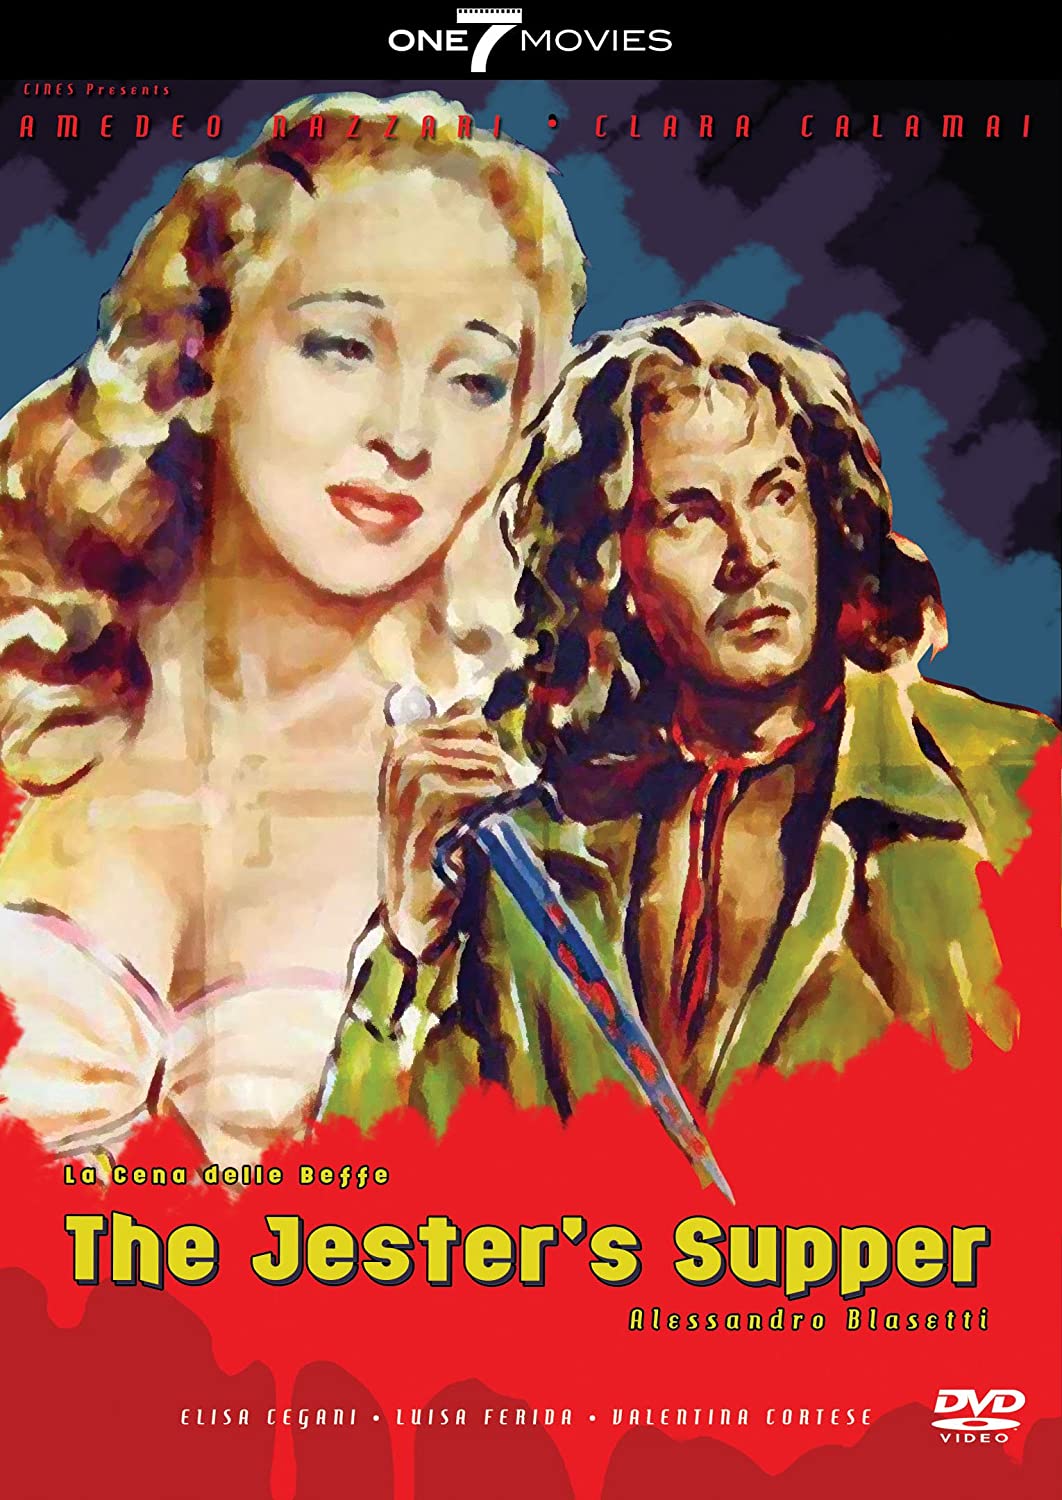 THE JESTER'S SUPPER DVD